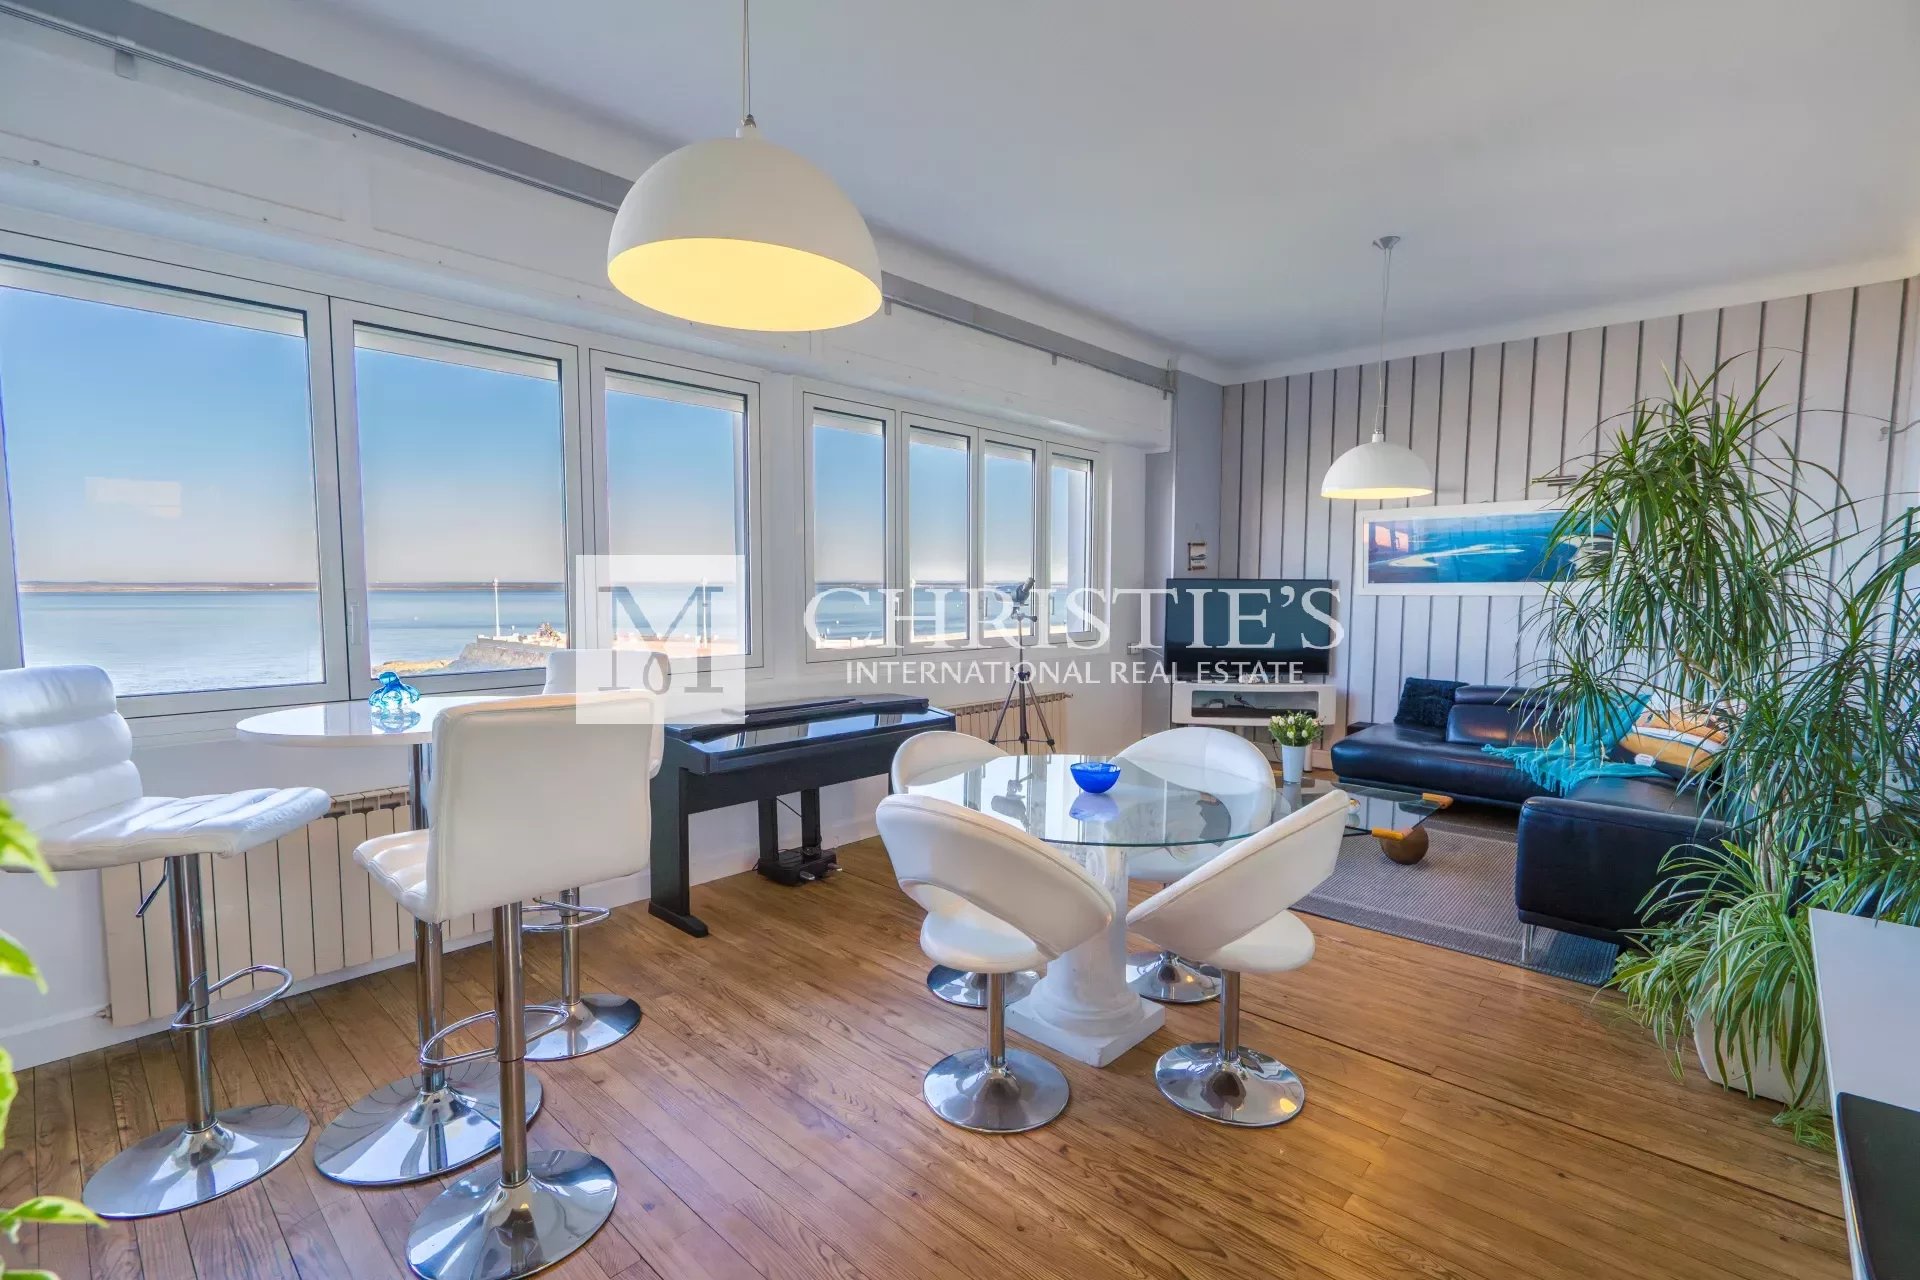 Arcachon center - Family home on the 1st line with a breathtaking view of the Bay of Arcachon